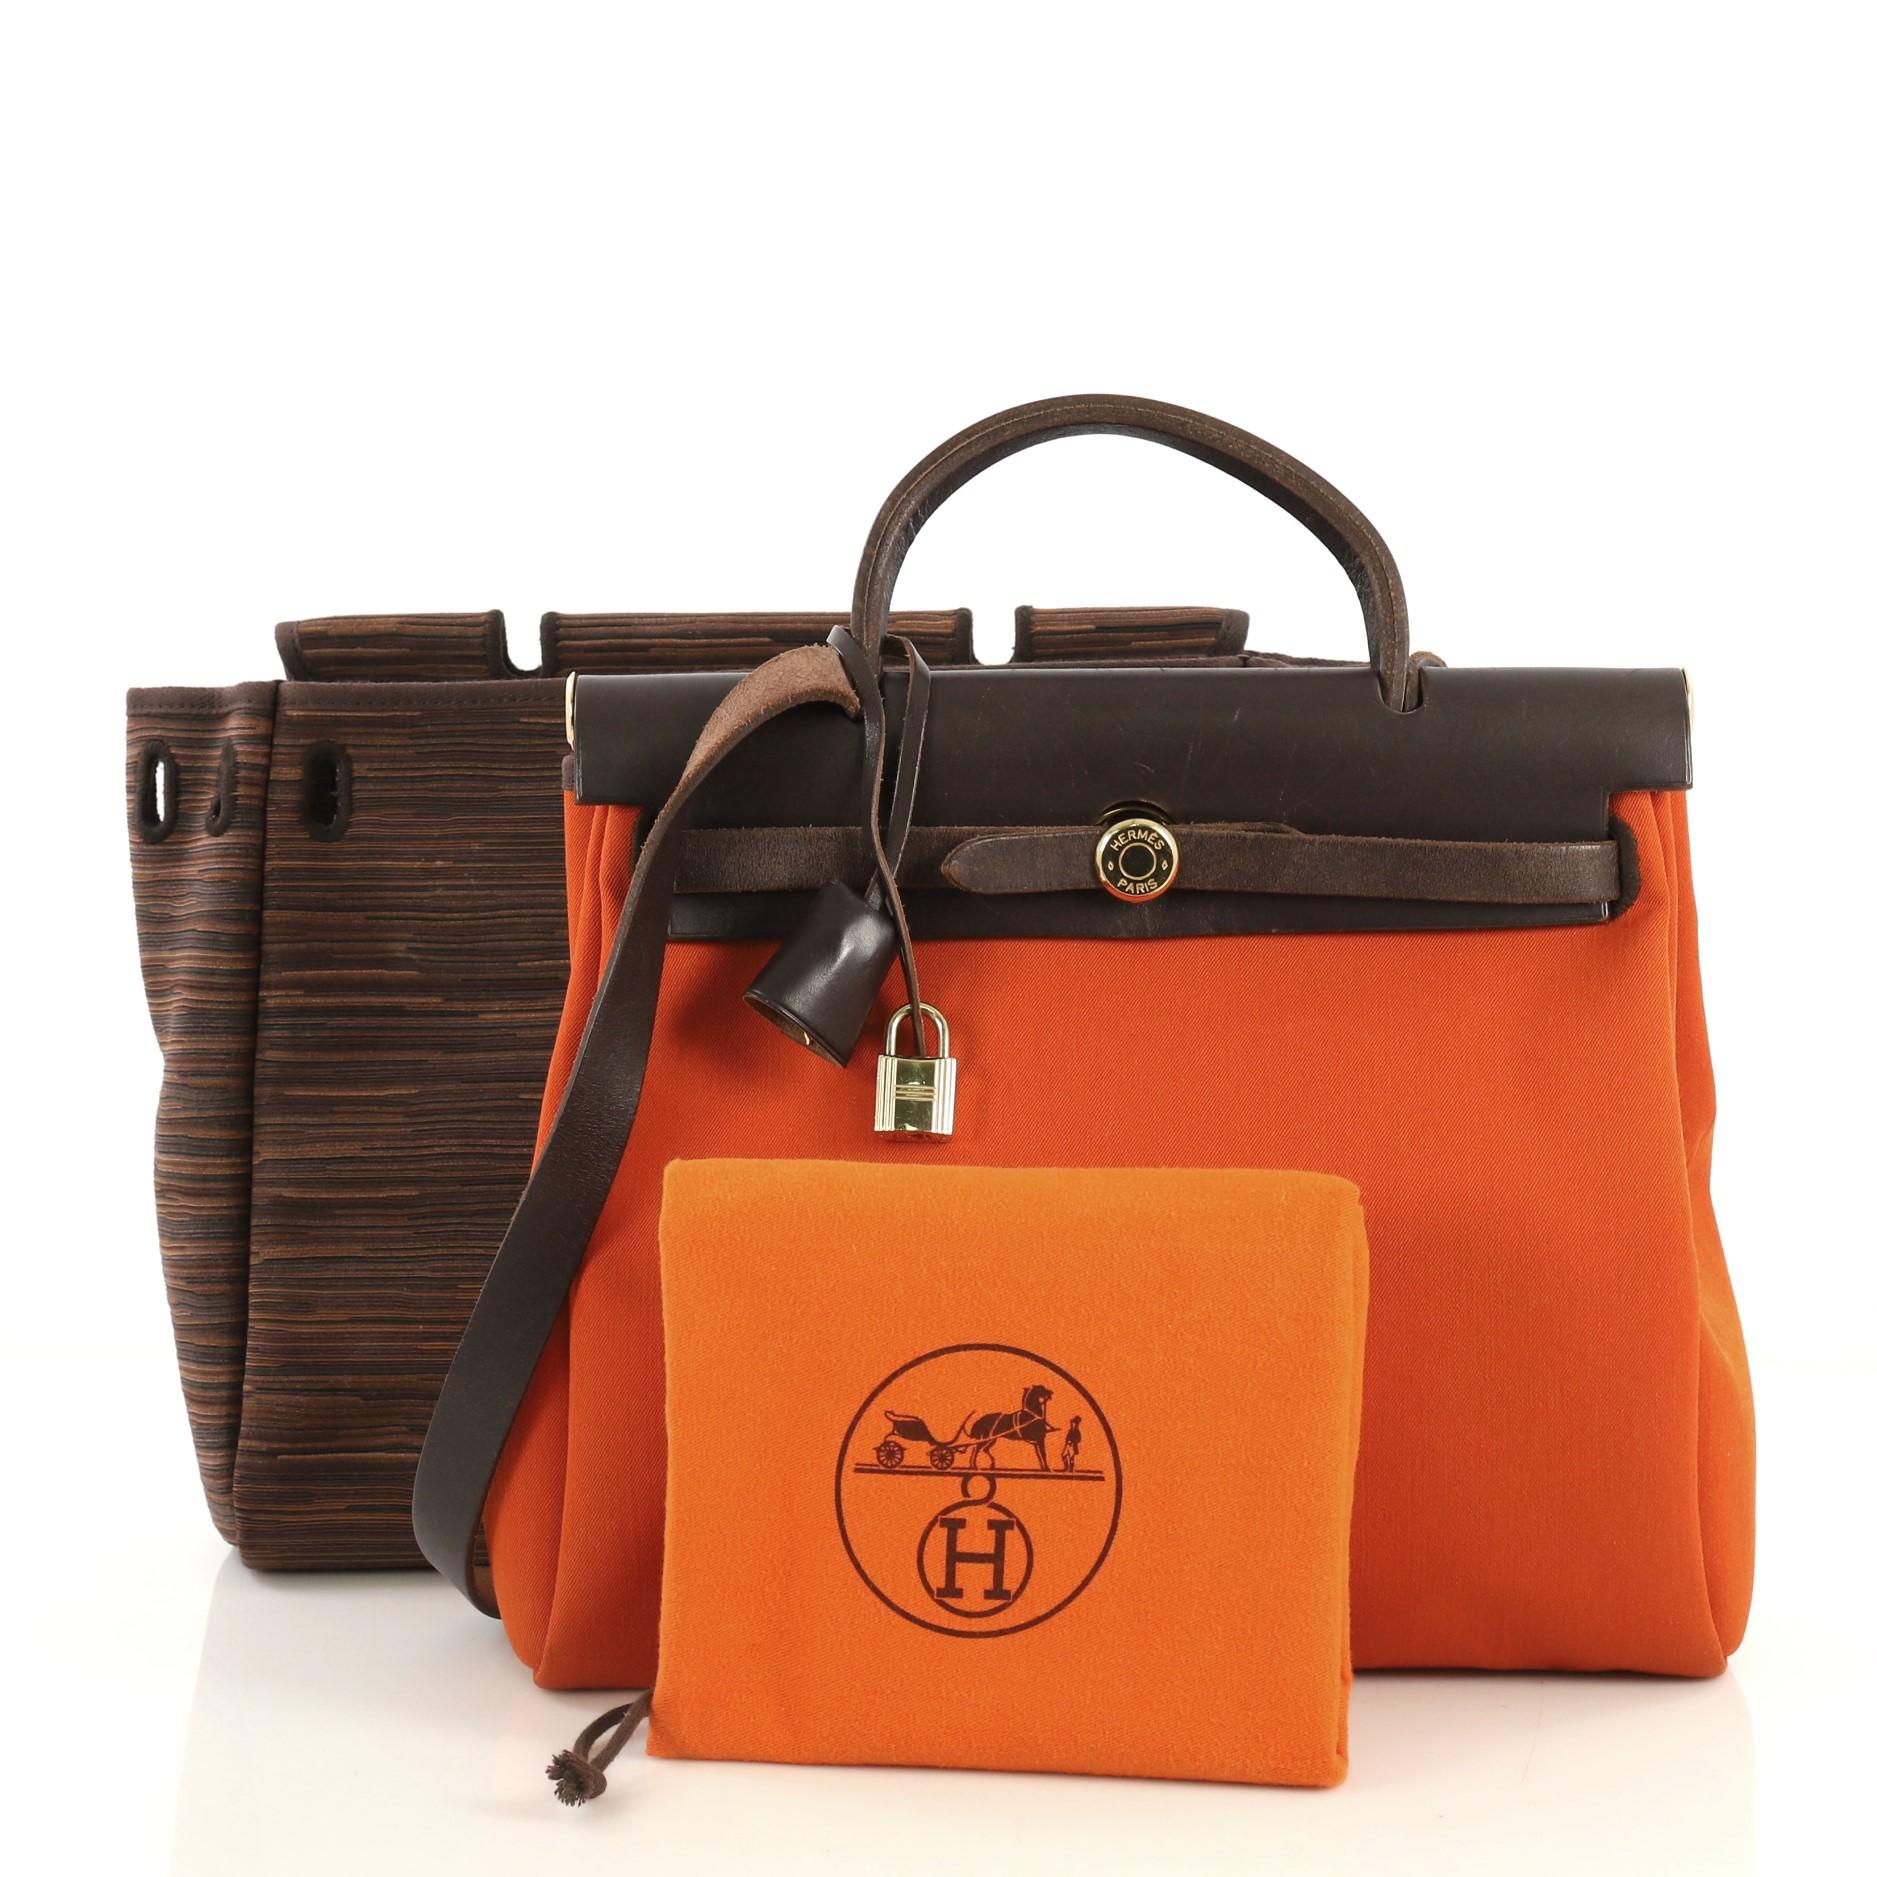 This Hermes Herbag Vibrato and Leather PM, crafted from Ebene brown Vache Hunter leather and Ebene brown and Orange H orange Vibrato, features leather top handle, long flat leather shoulder strap, top frame, and gold hardware. Its leather strap